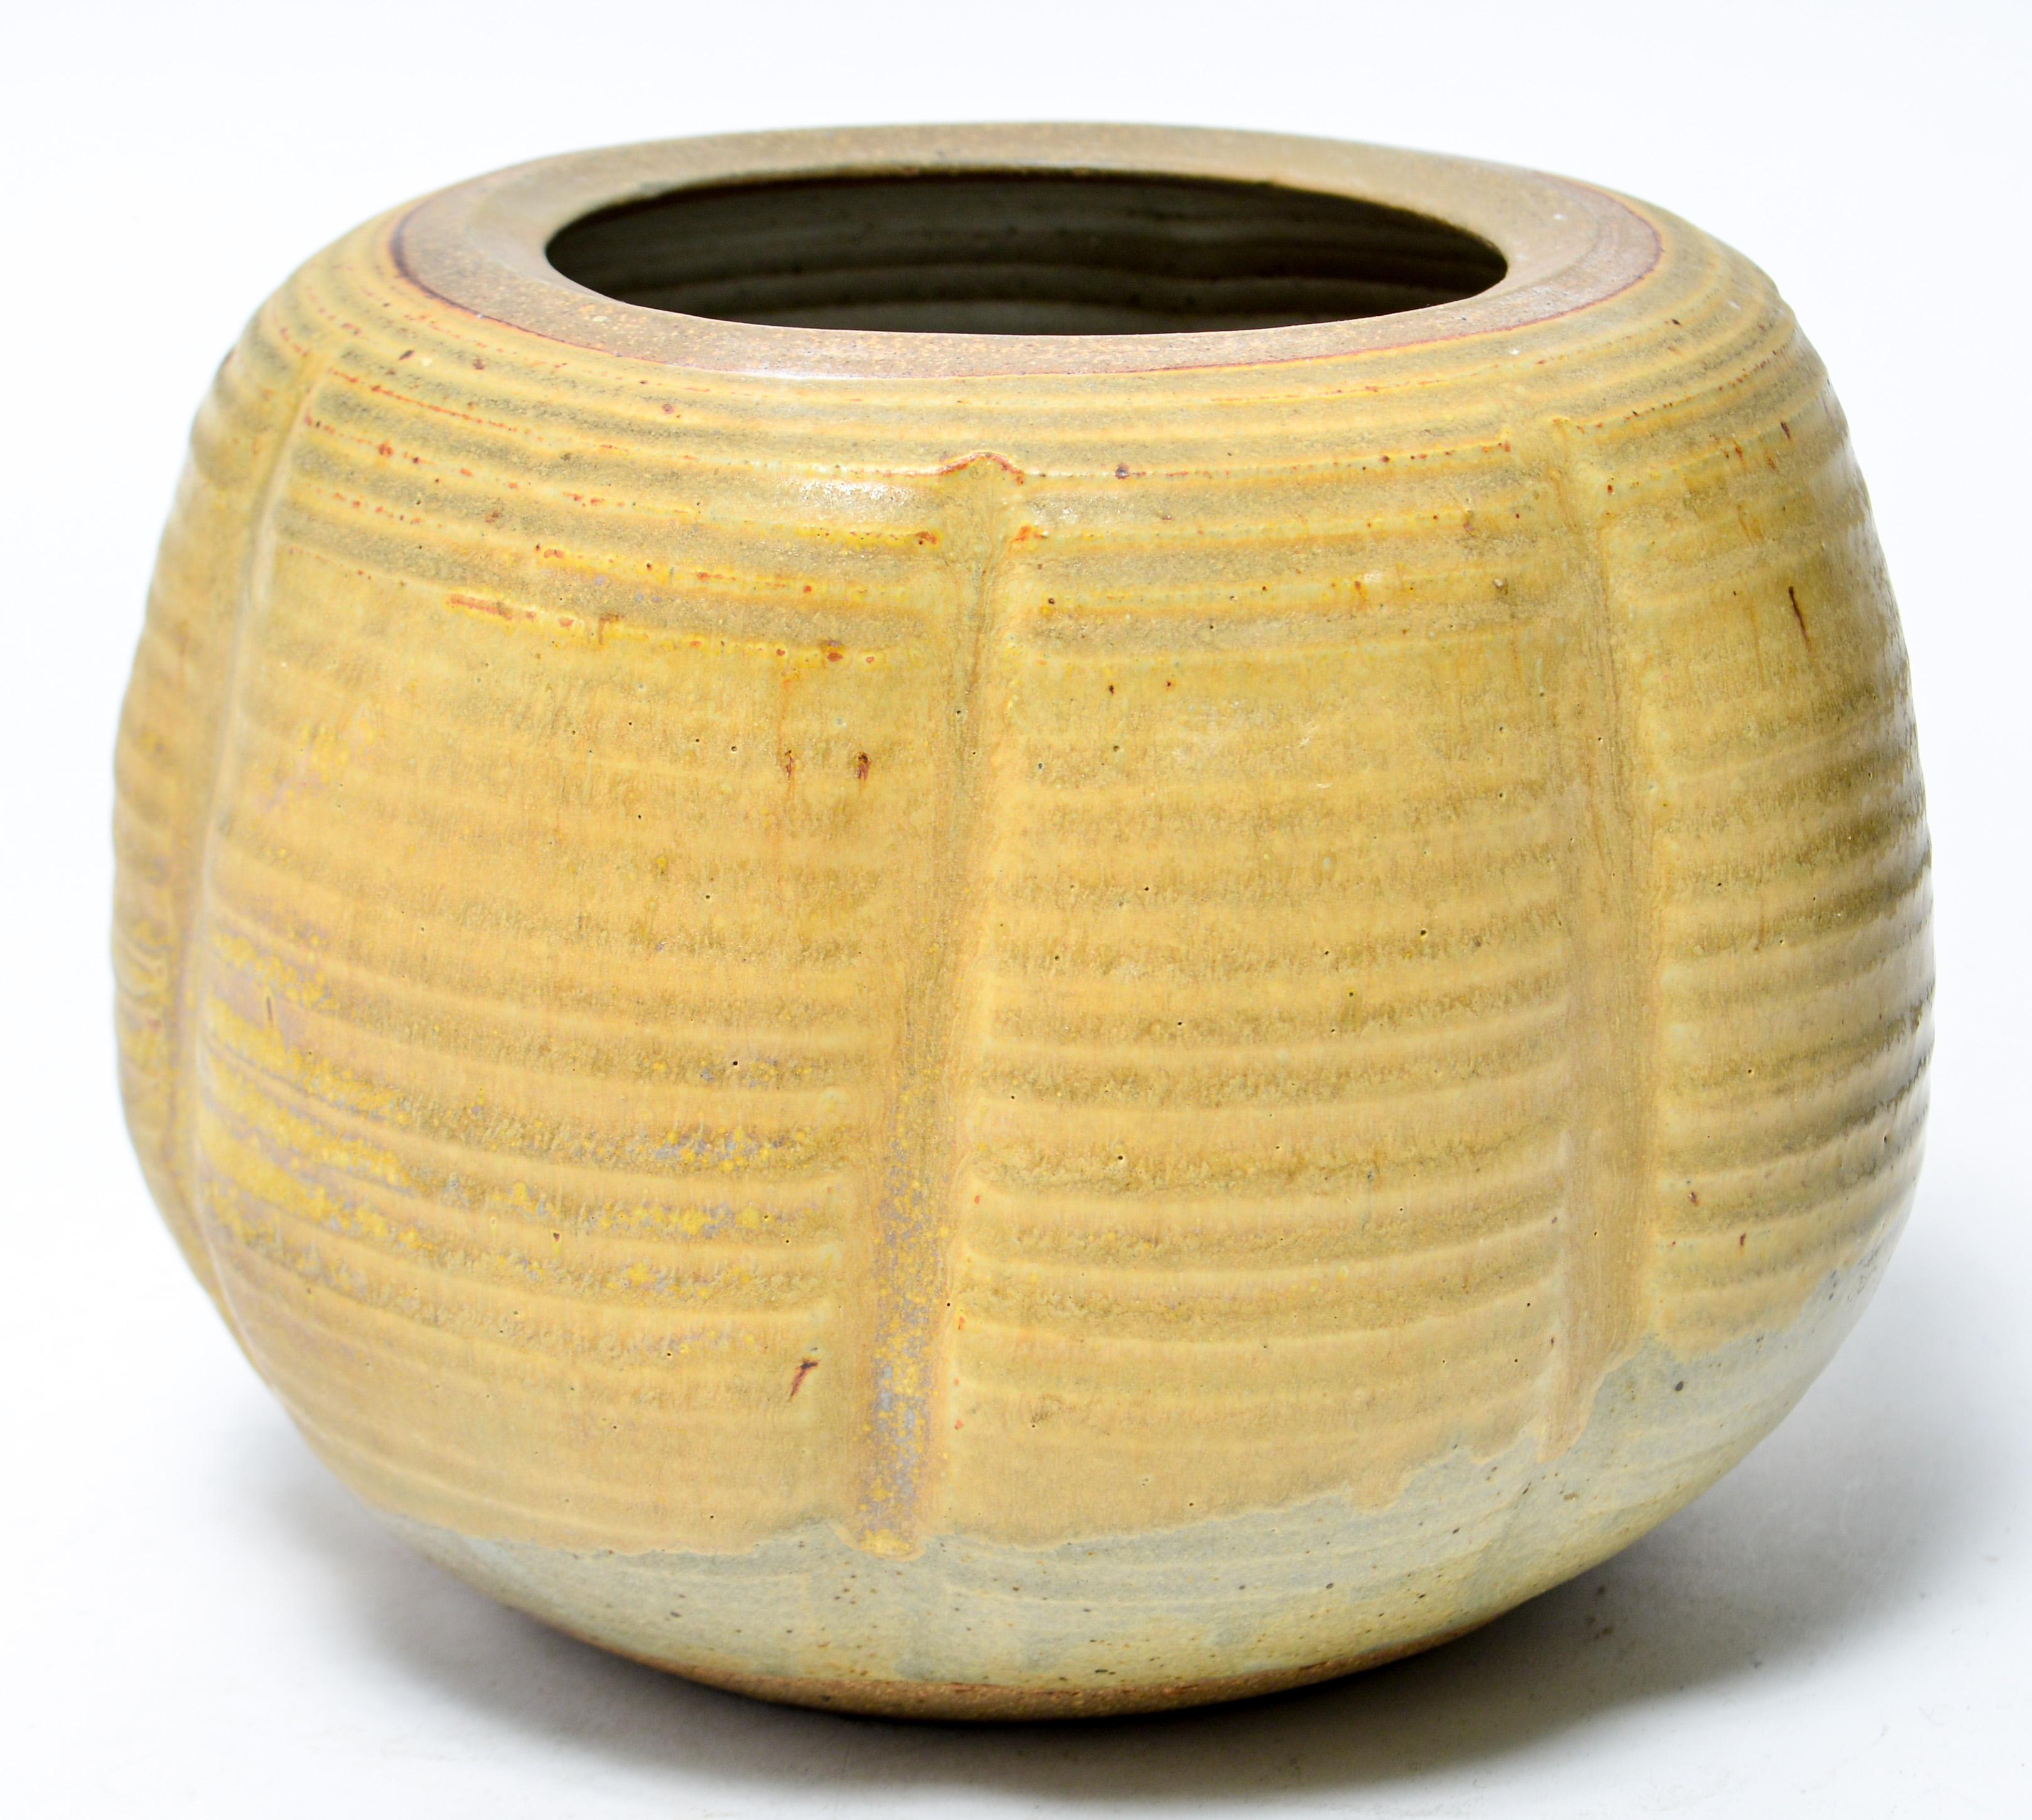 American Mid-Century Modern stoneware art pottery vase designed by Karen Karnes (American, 1925-2016) with body in lobed form and green glaze. The piece is signed with an impressed artist's monogram 